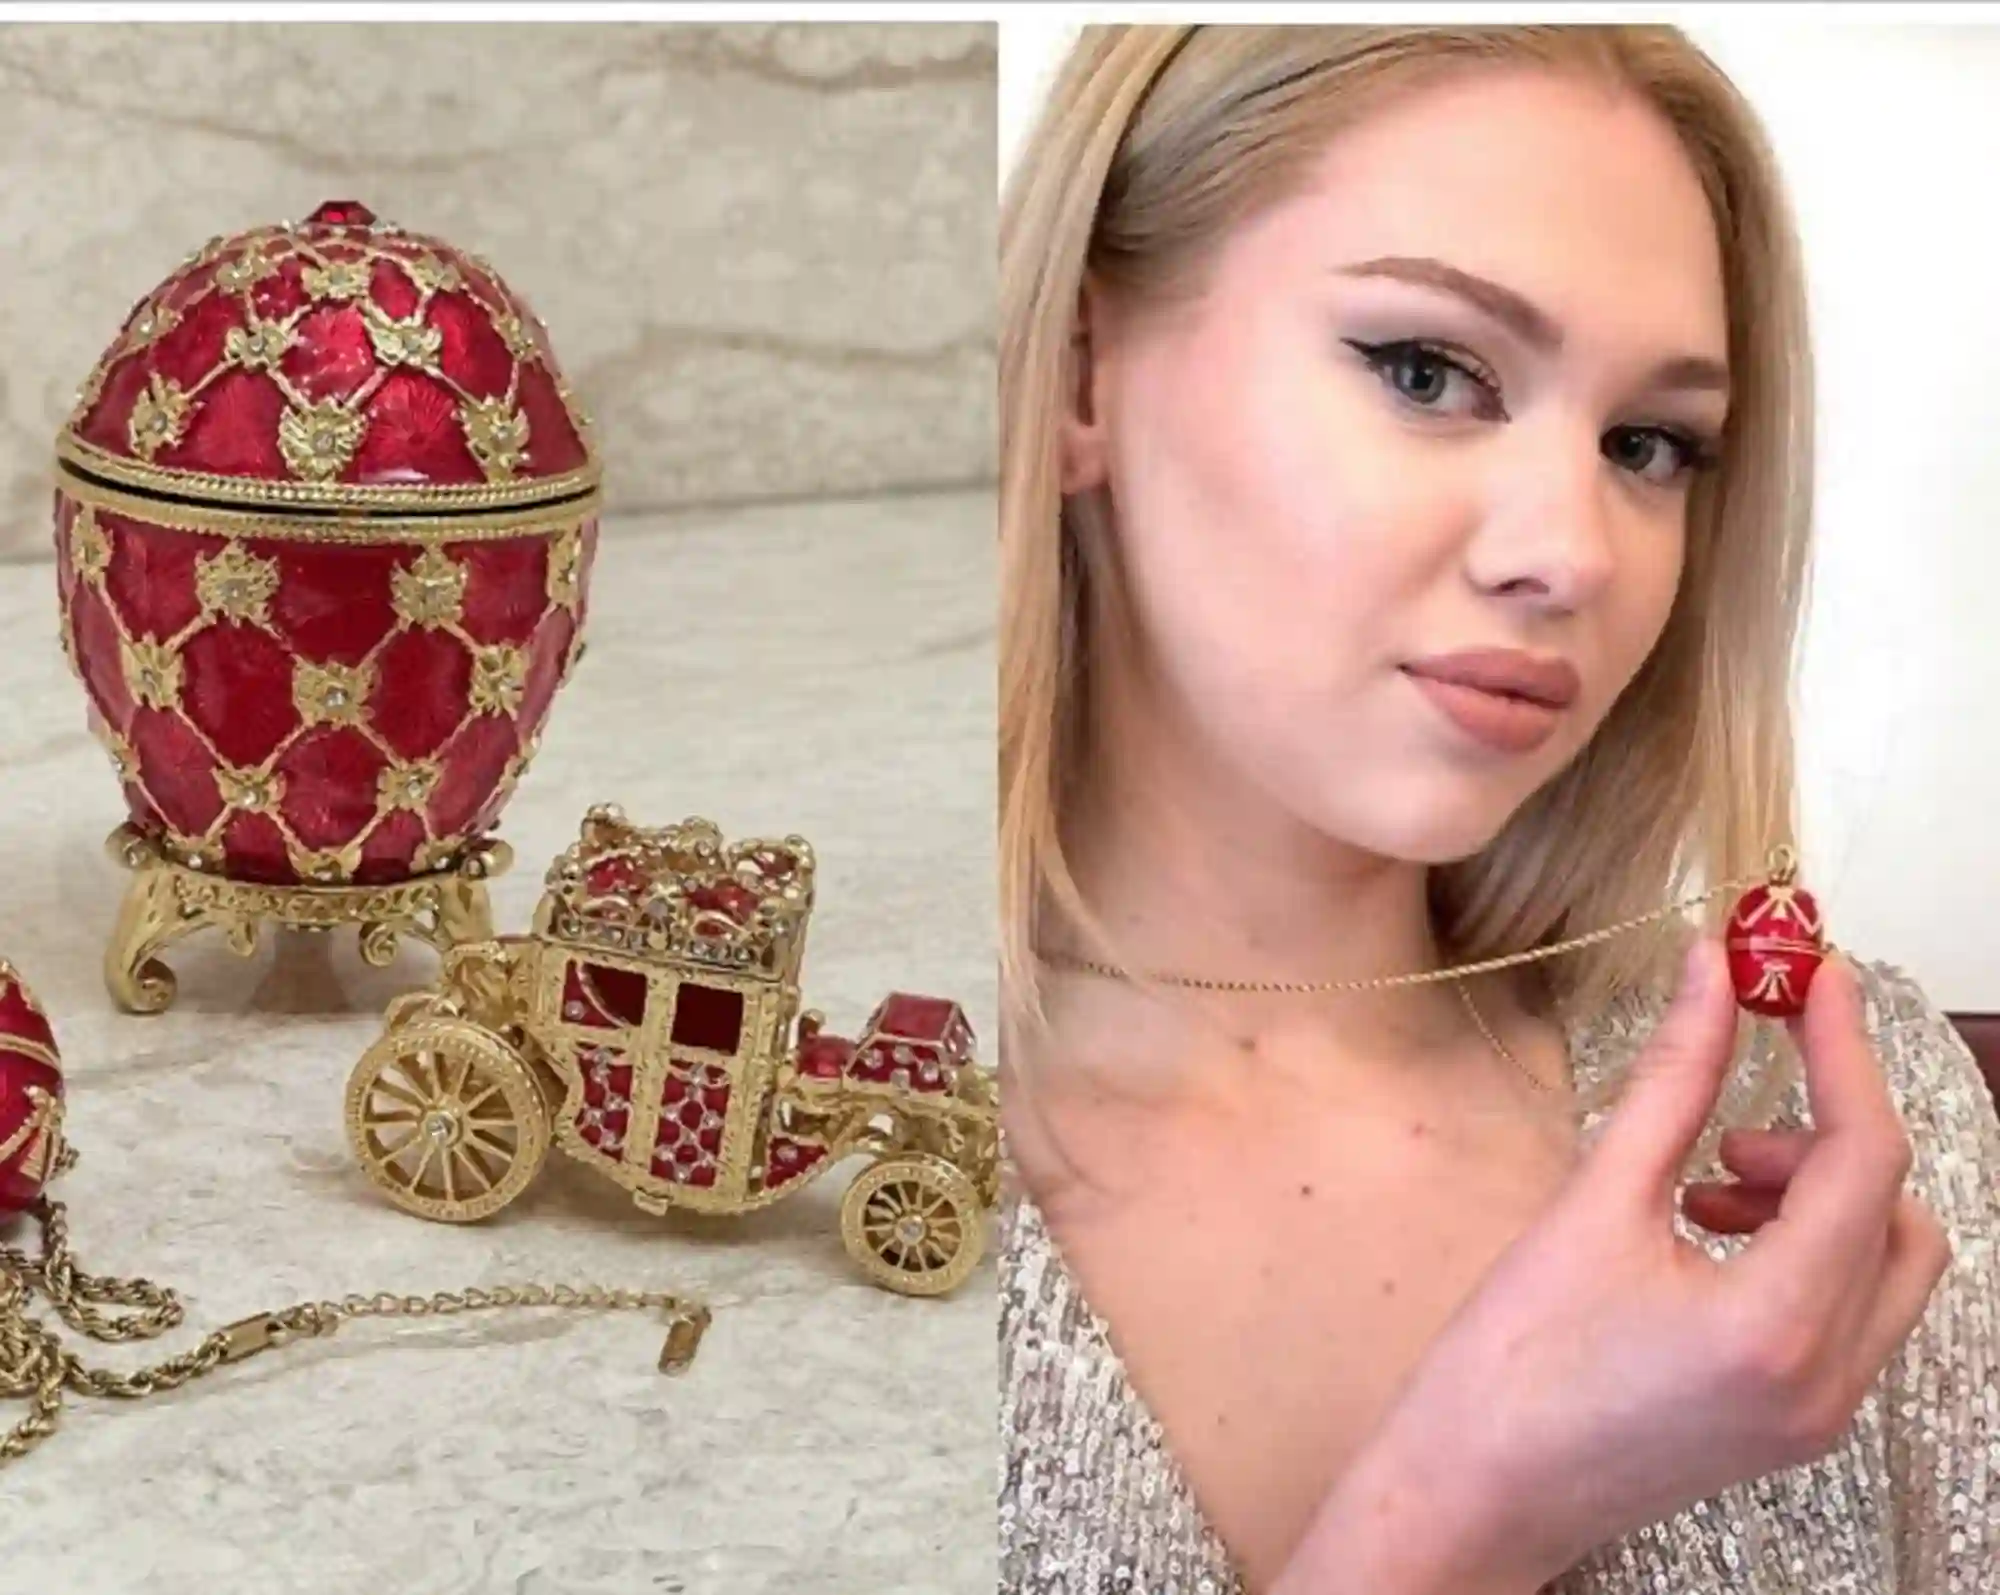 Faberge Ruby Faberge style egg & Faberge Pendant - Red Faberge egg Perfect gift to her HANDMADE Faberge Luxury Jewelry box egg 24k GOLD 